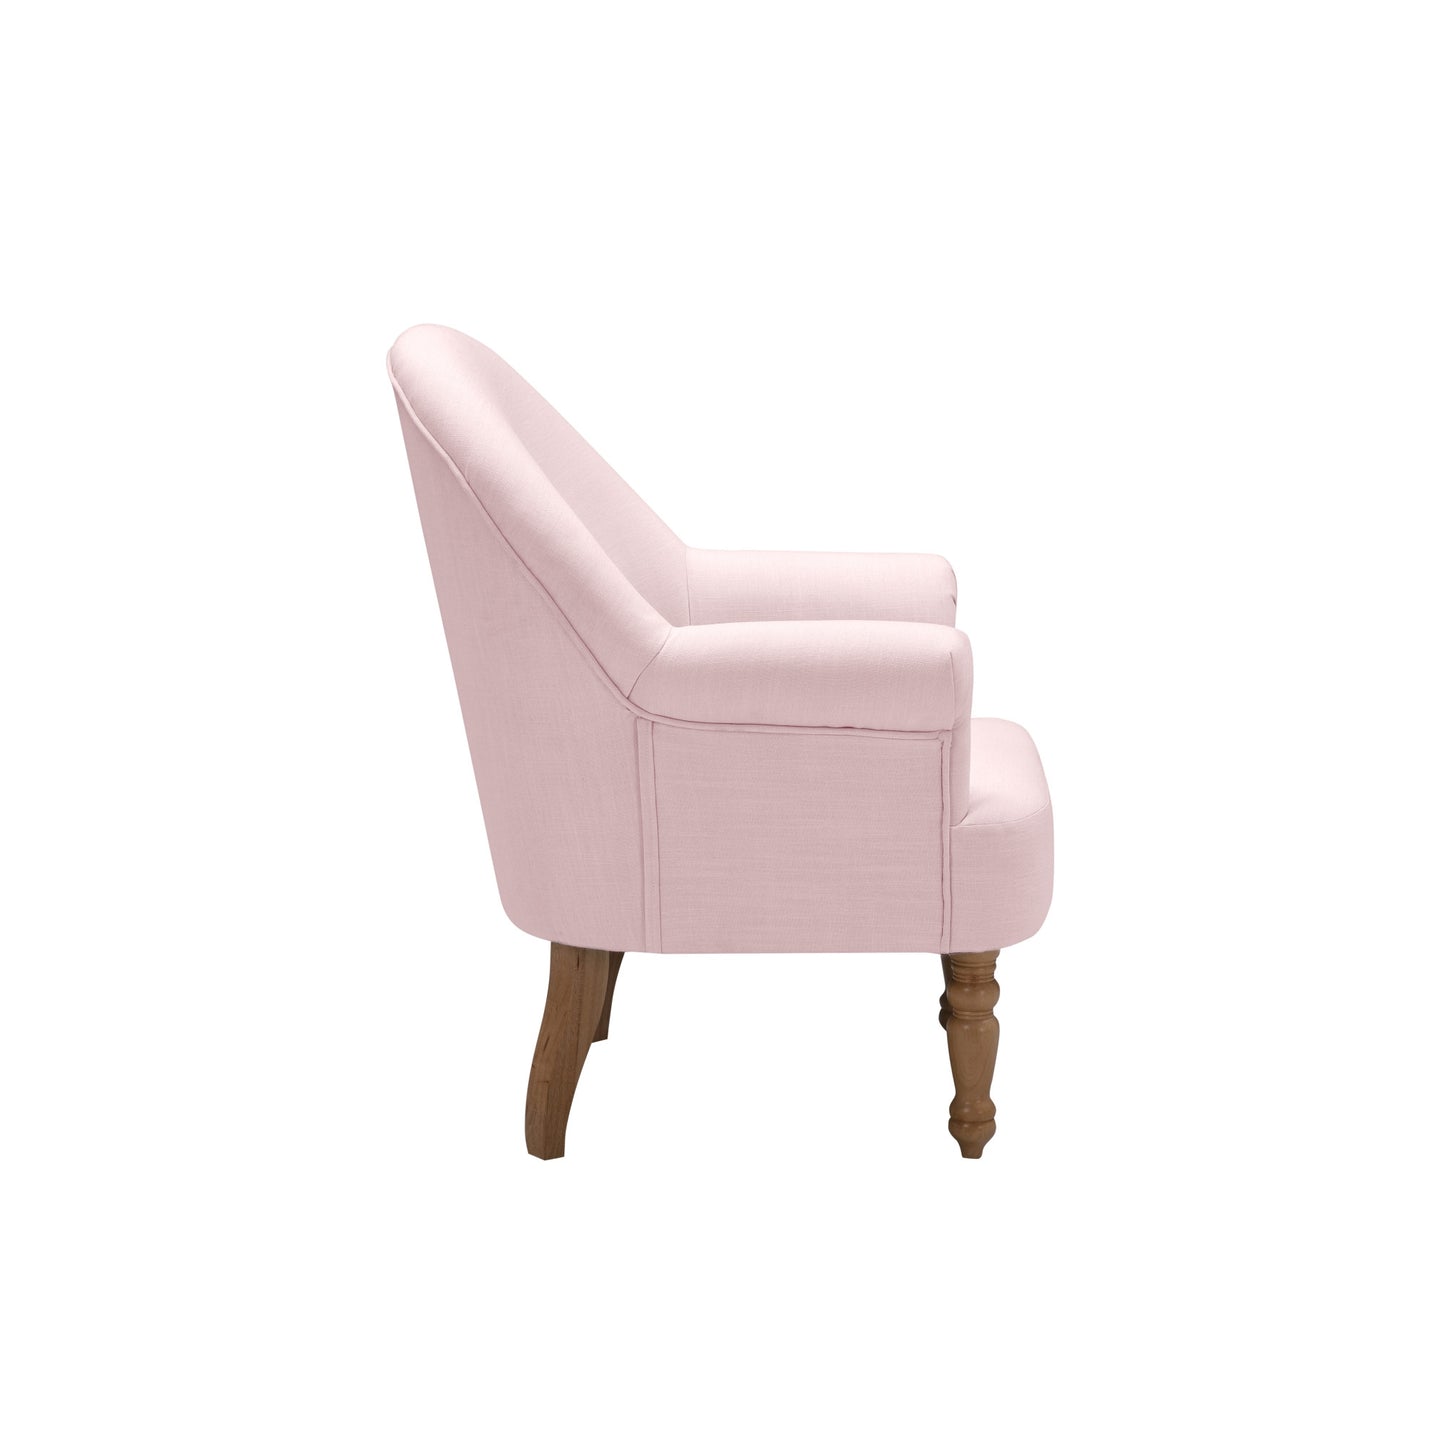 33" Pink And Brown Linen Arm Chair